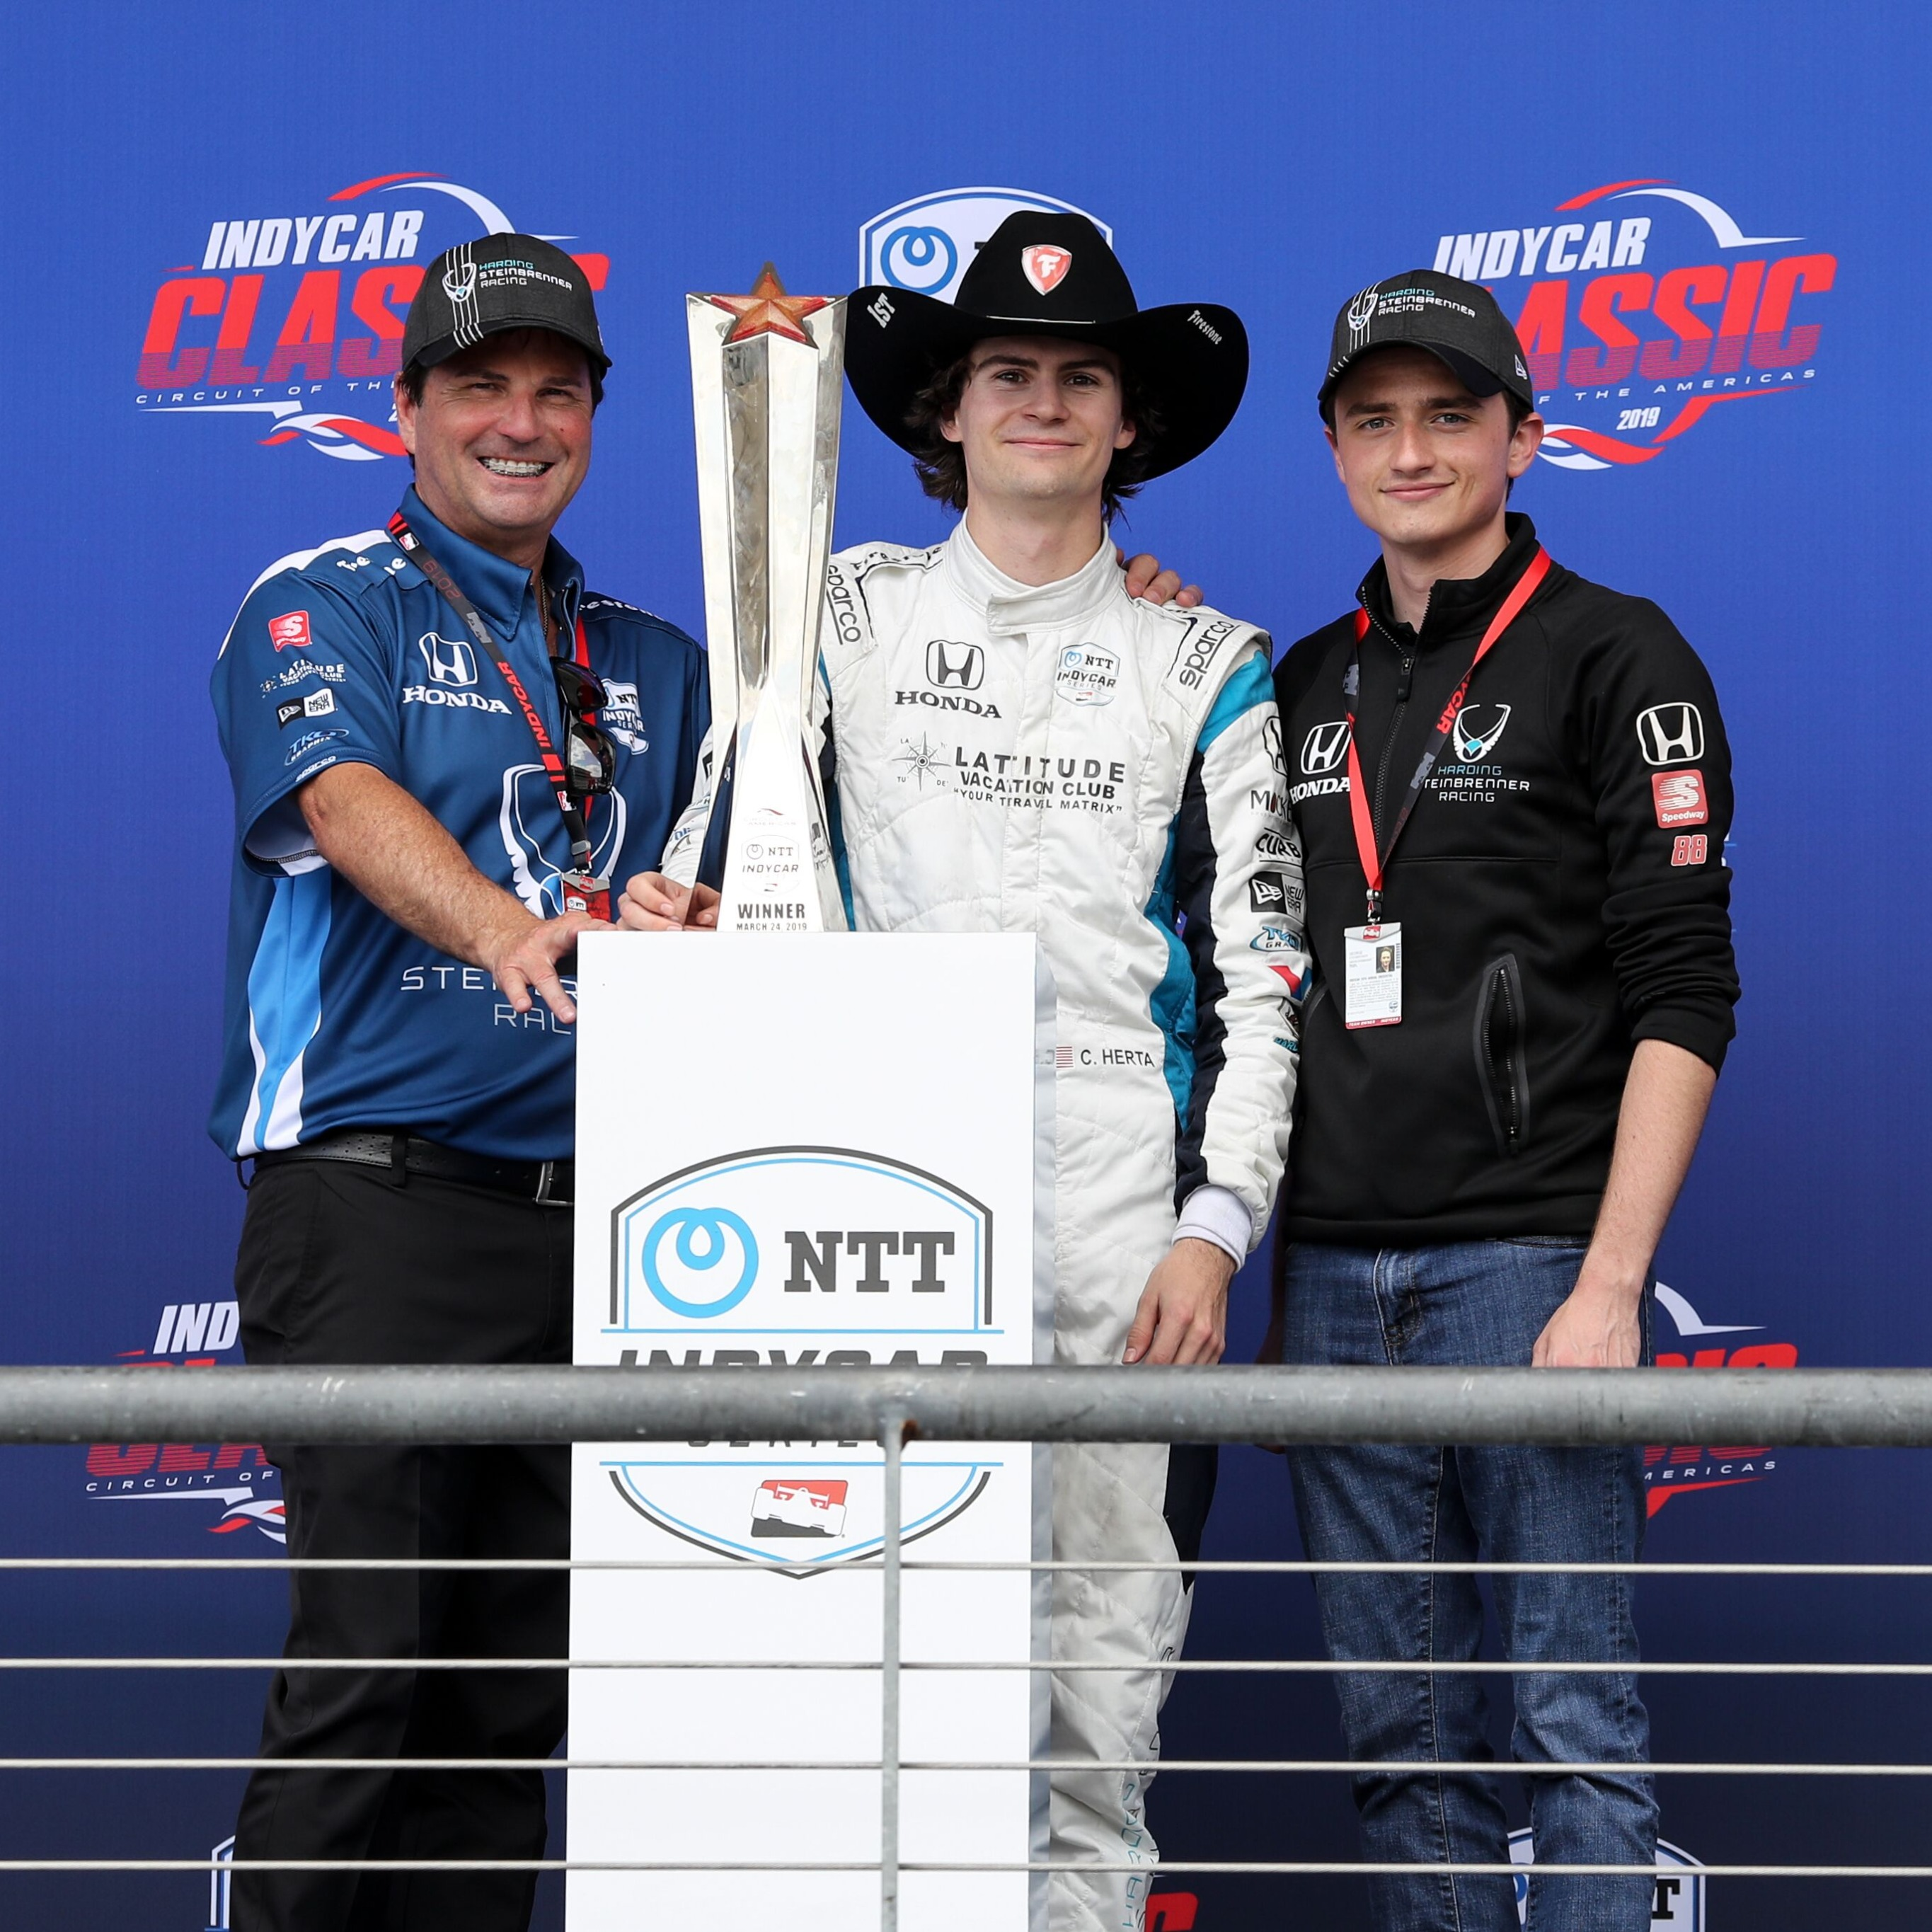 Otto talks Indy this weekend at Road America with Colton Herta